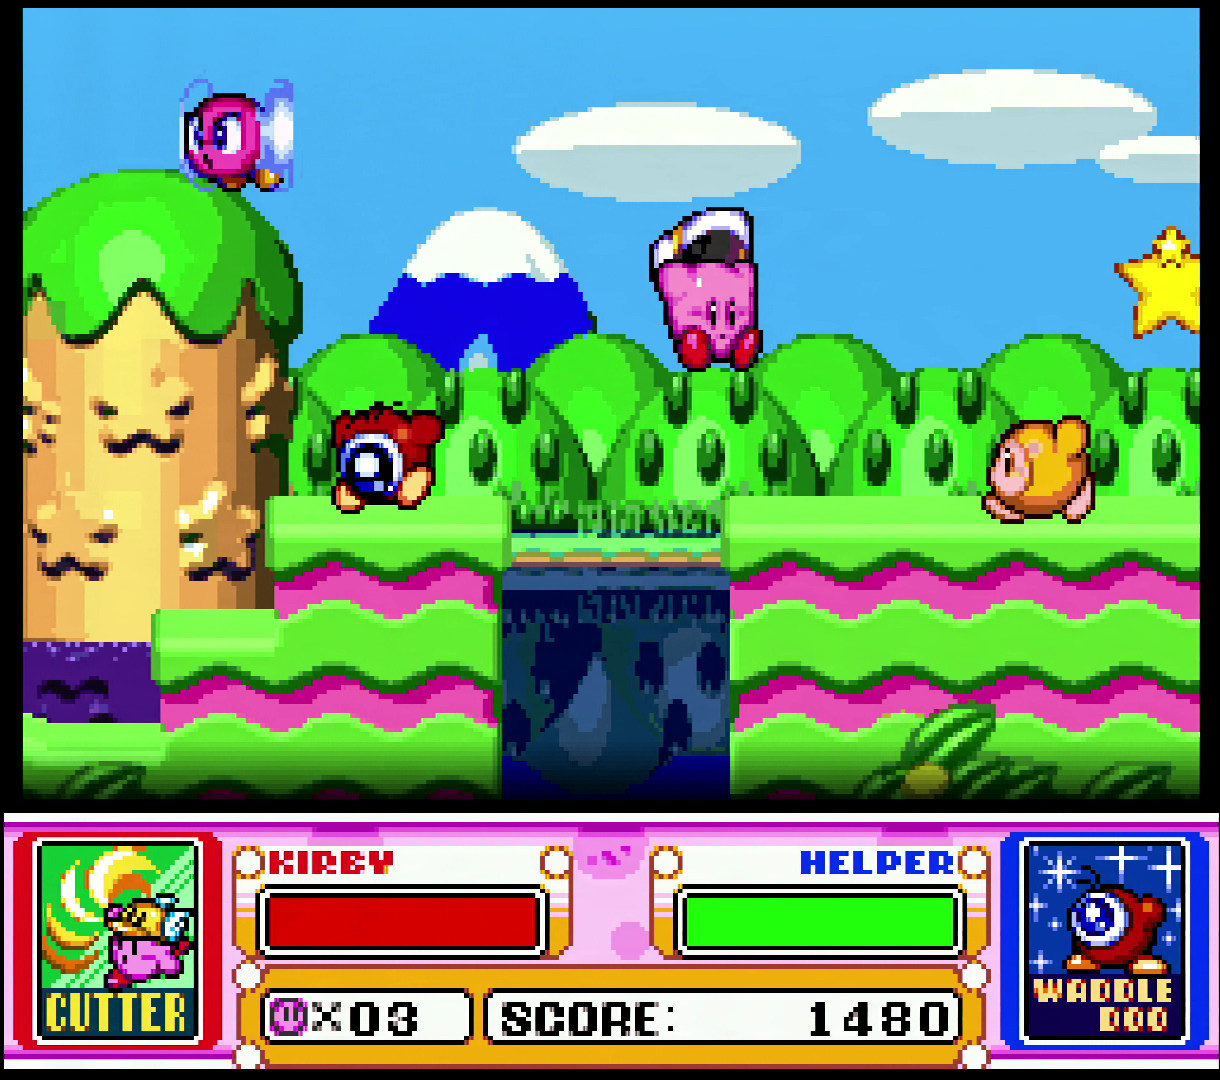 Snes Central: Kirby Super Star